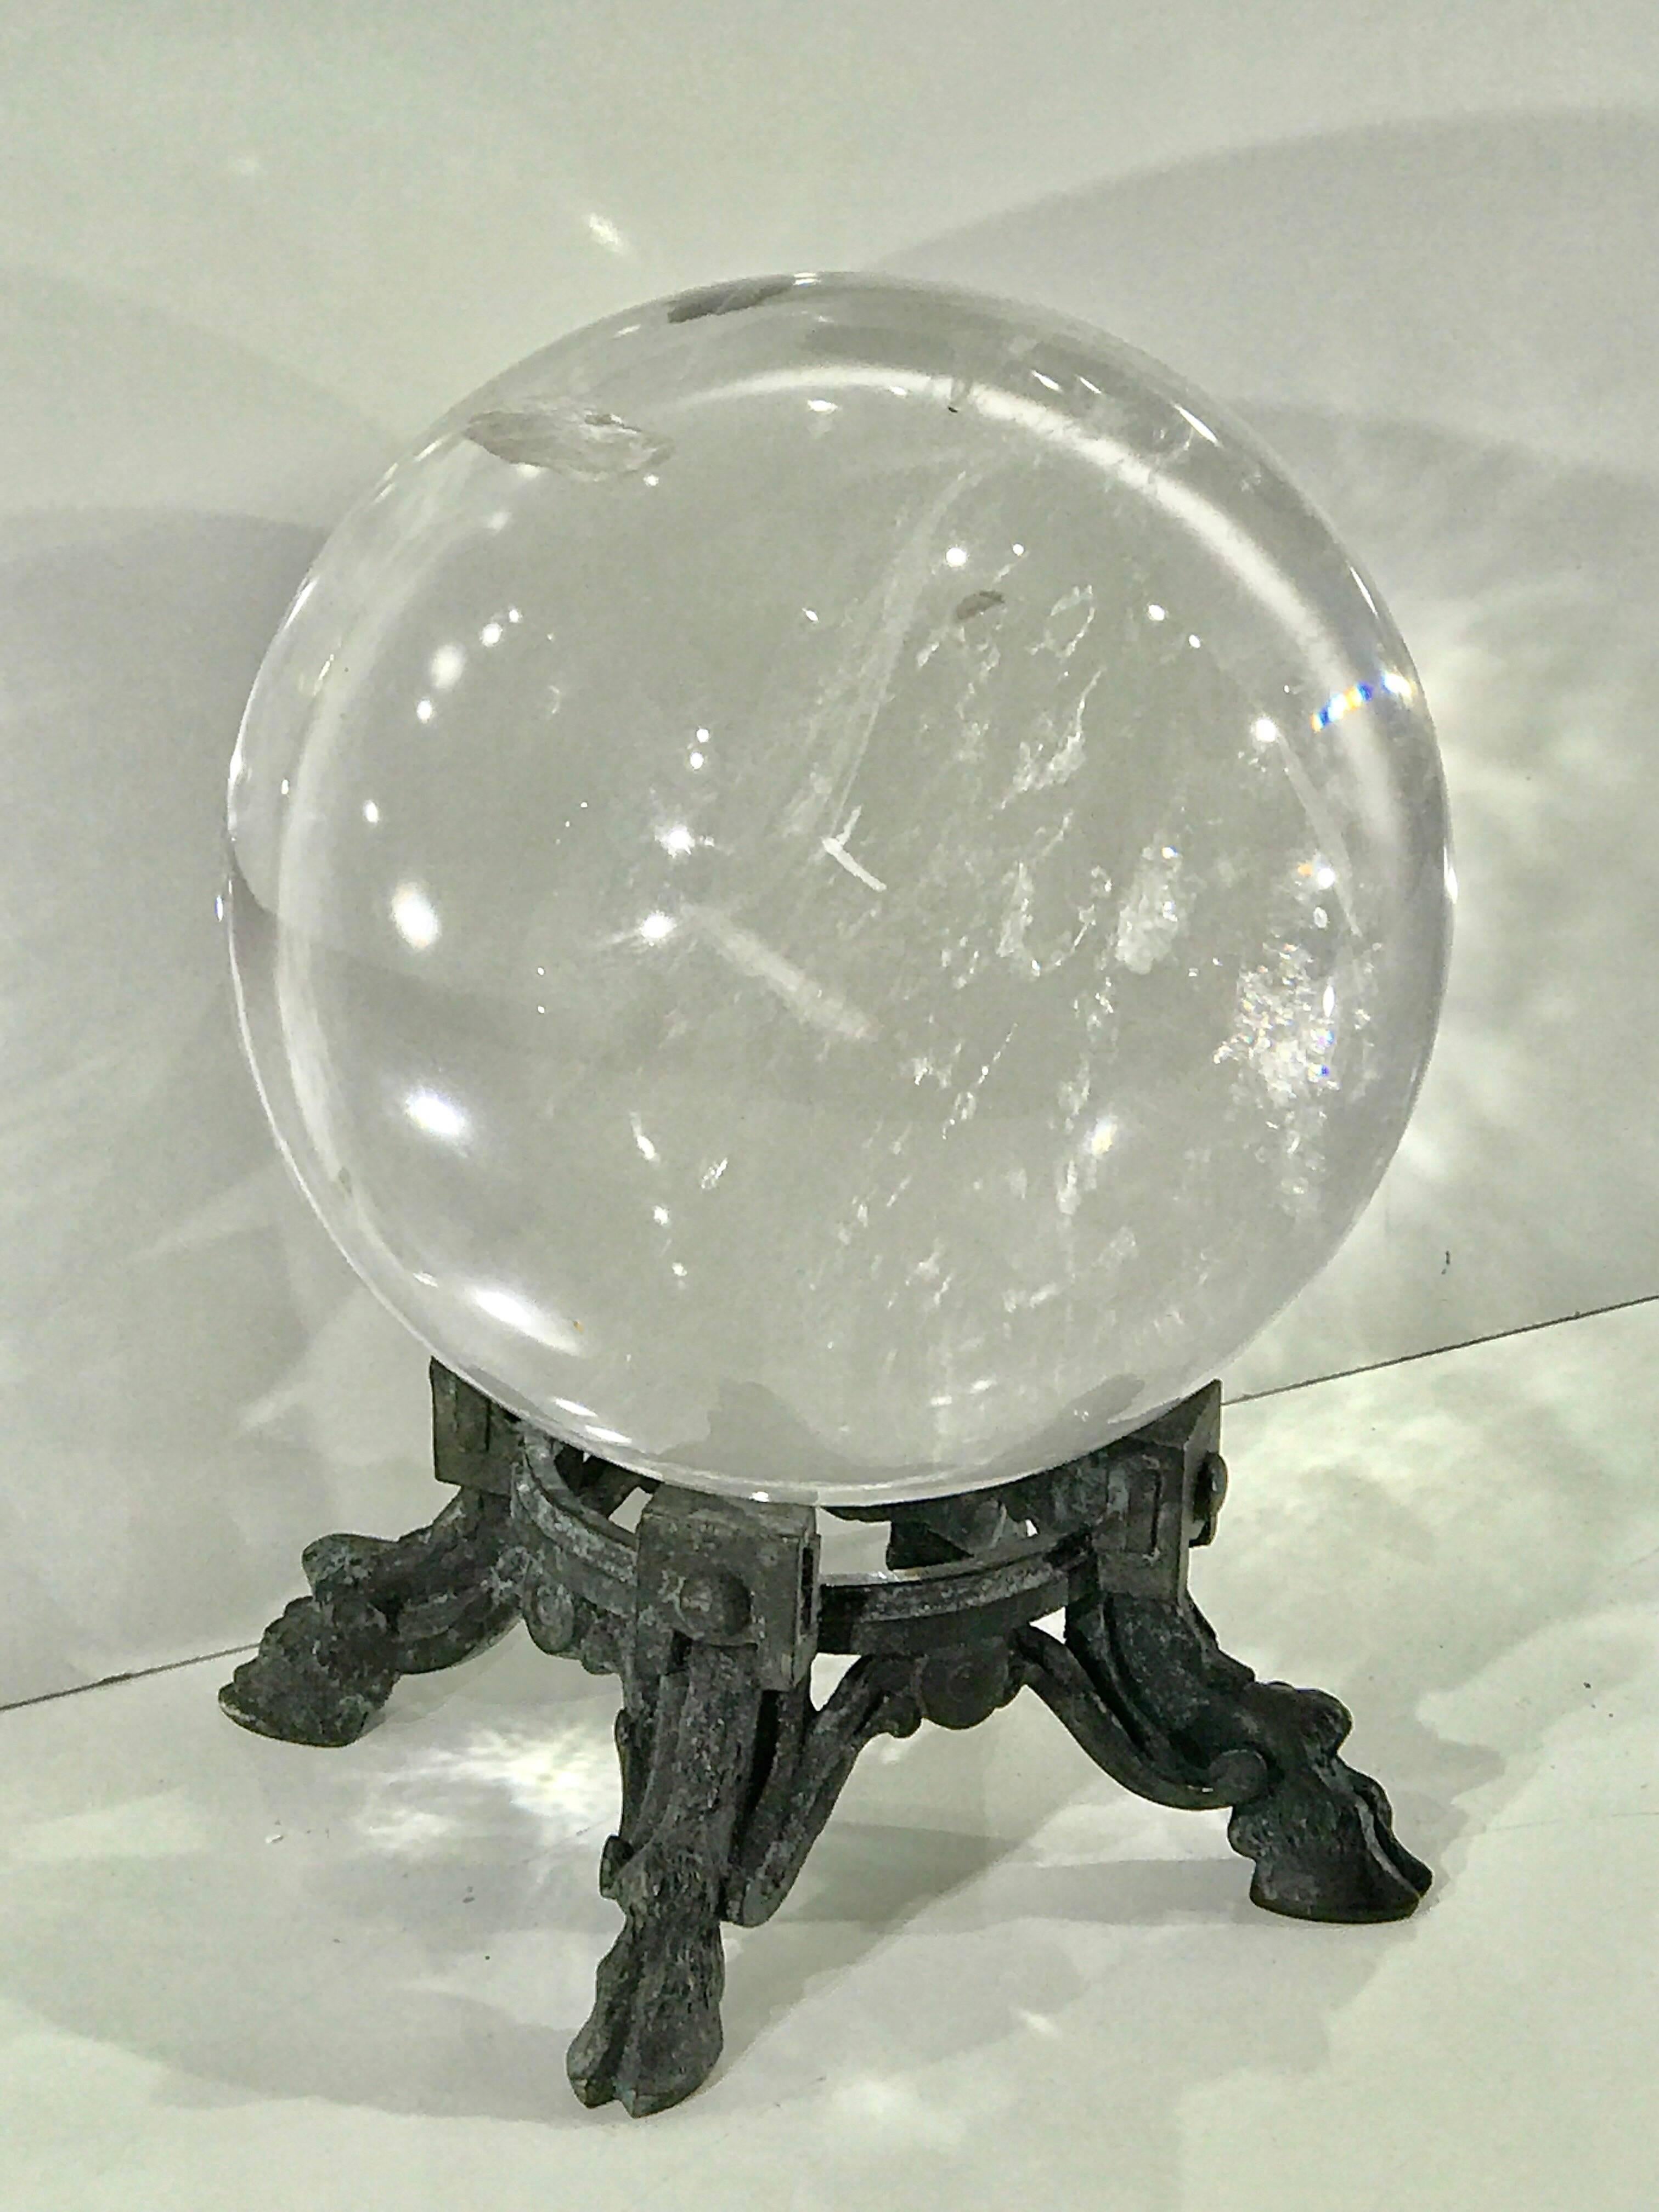 18th-19th century French rock crystal ball on a later Louis XIV style Verdigris bronze stand.
A magnificent large specimen antique 165mm rock crystal sphere.
Raised on a finely cast and patinated bronze hoof foot stand. Measure: 4.5